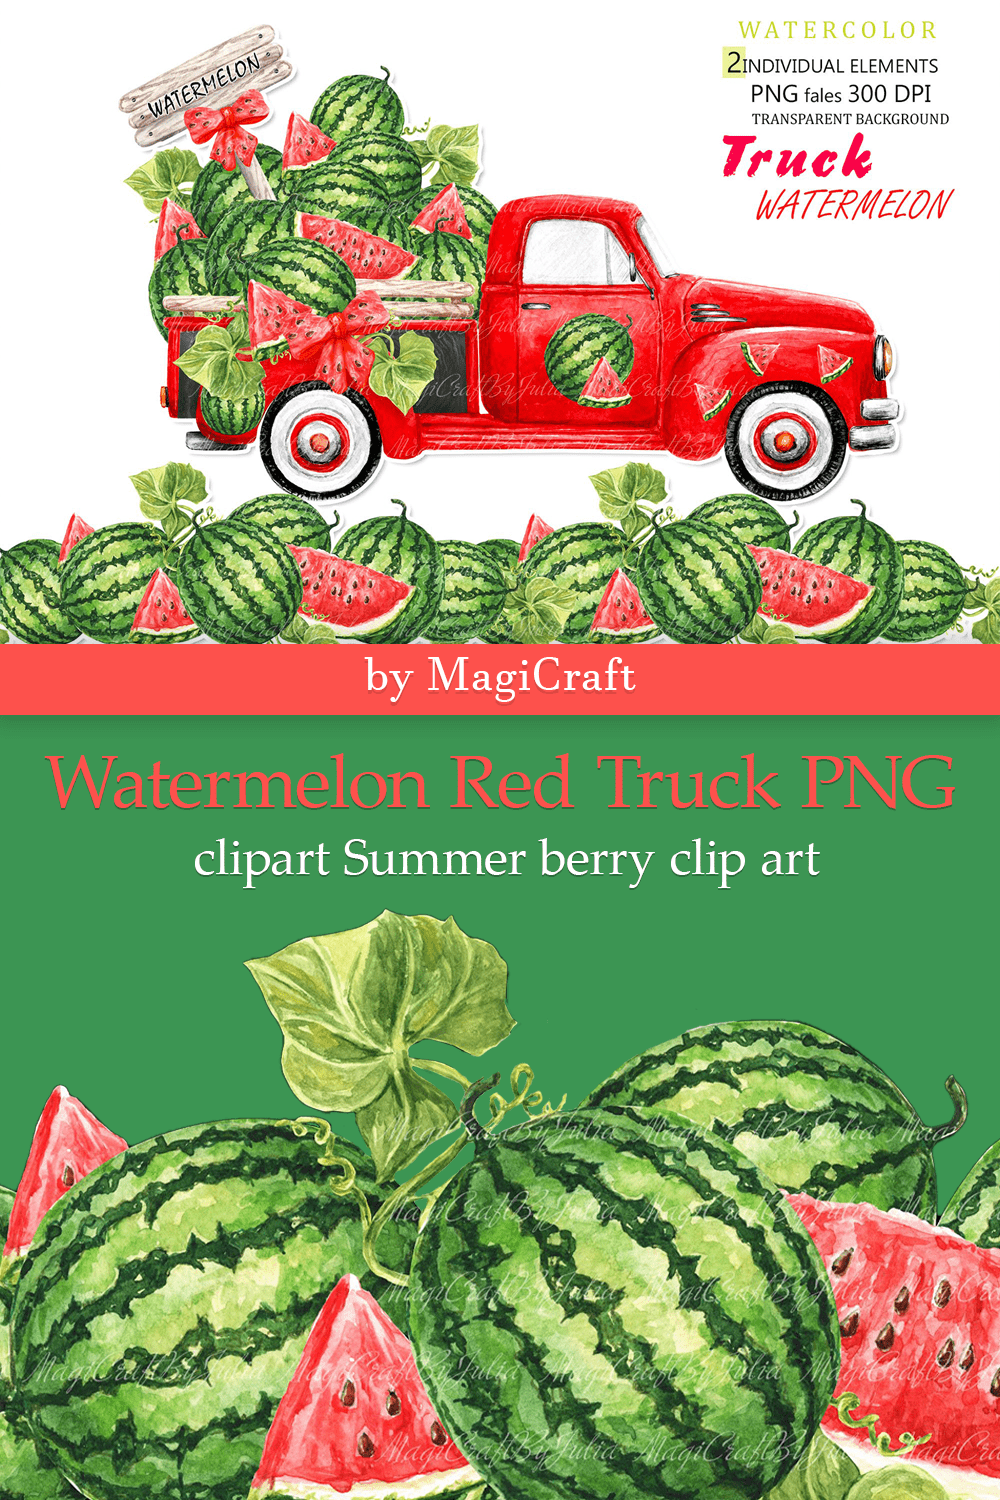 Watermelon Red Truck PNG clipart - pinterest image preview.